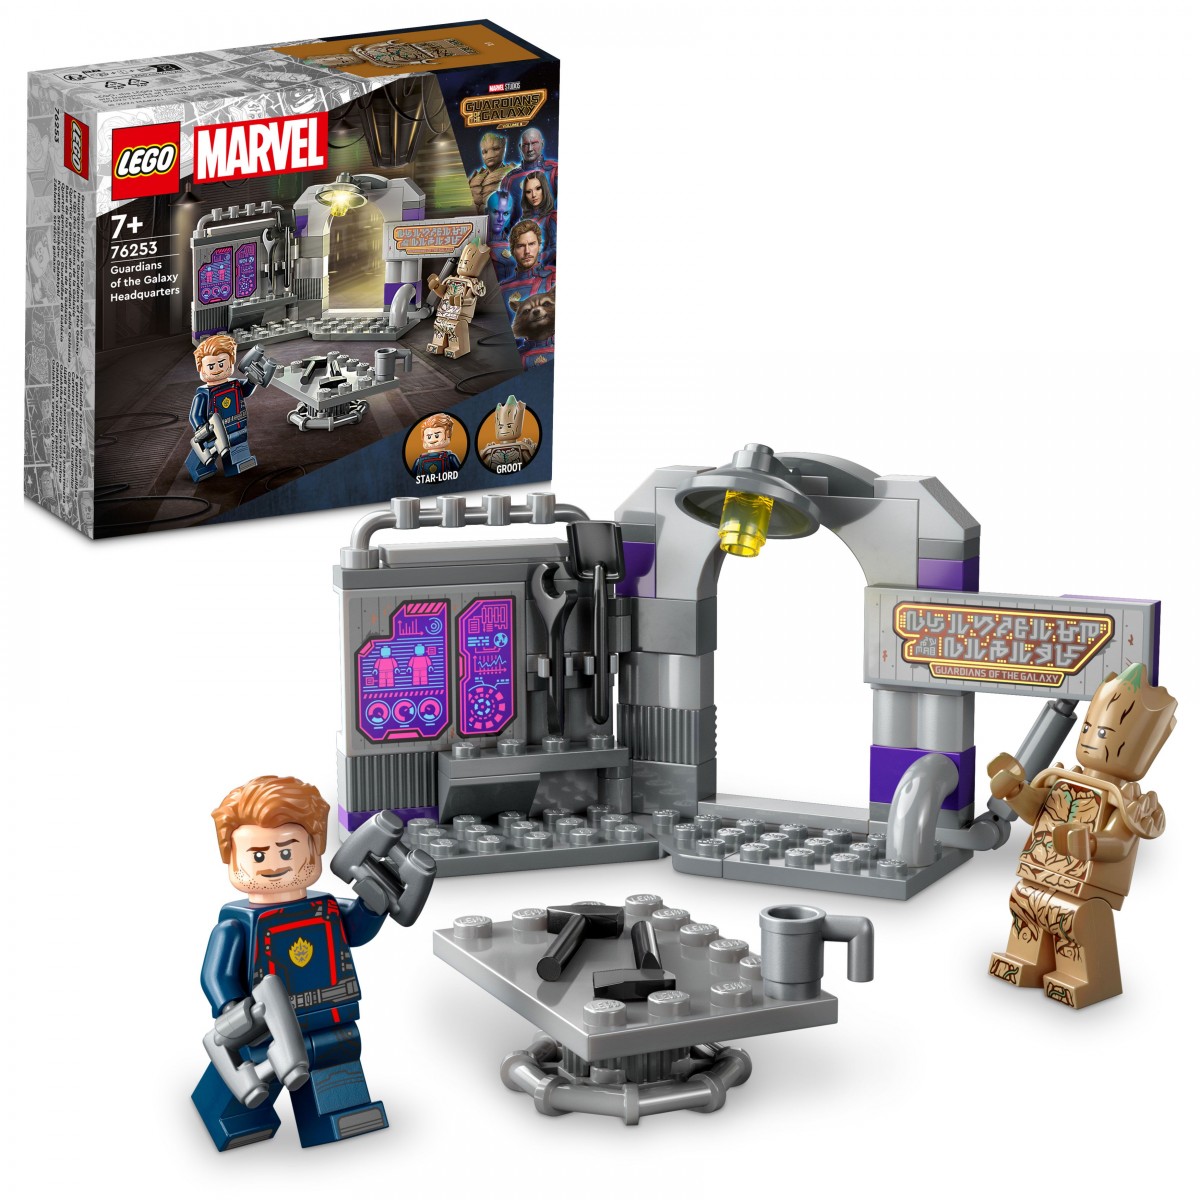 Lego Marvel Guardians Of The Galaxy Headquarters 76253 Building Toy Set (67 Pieces), 7Y+